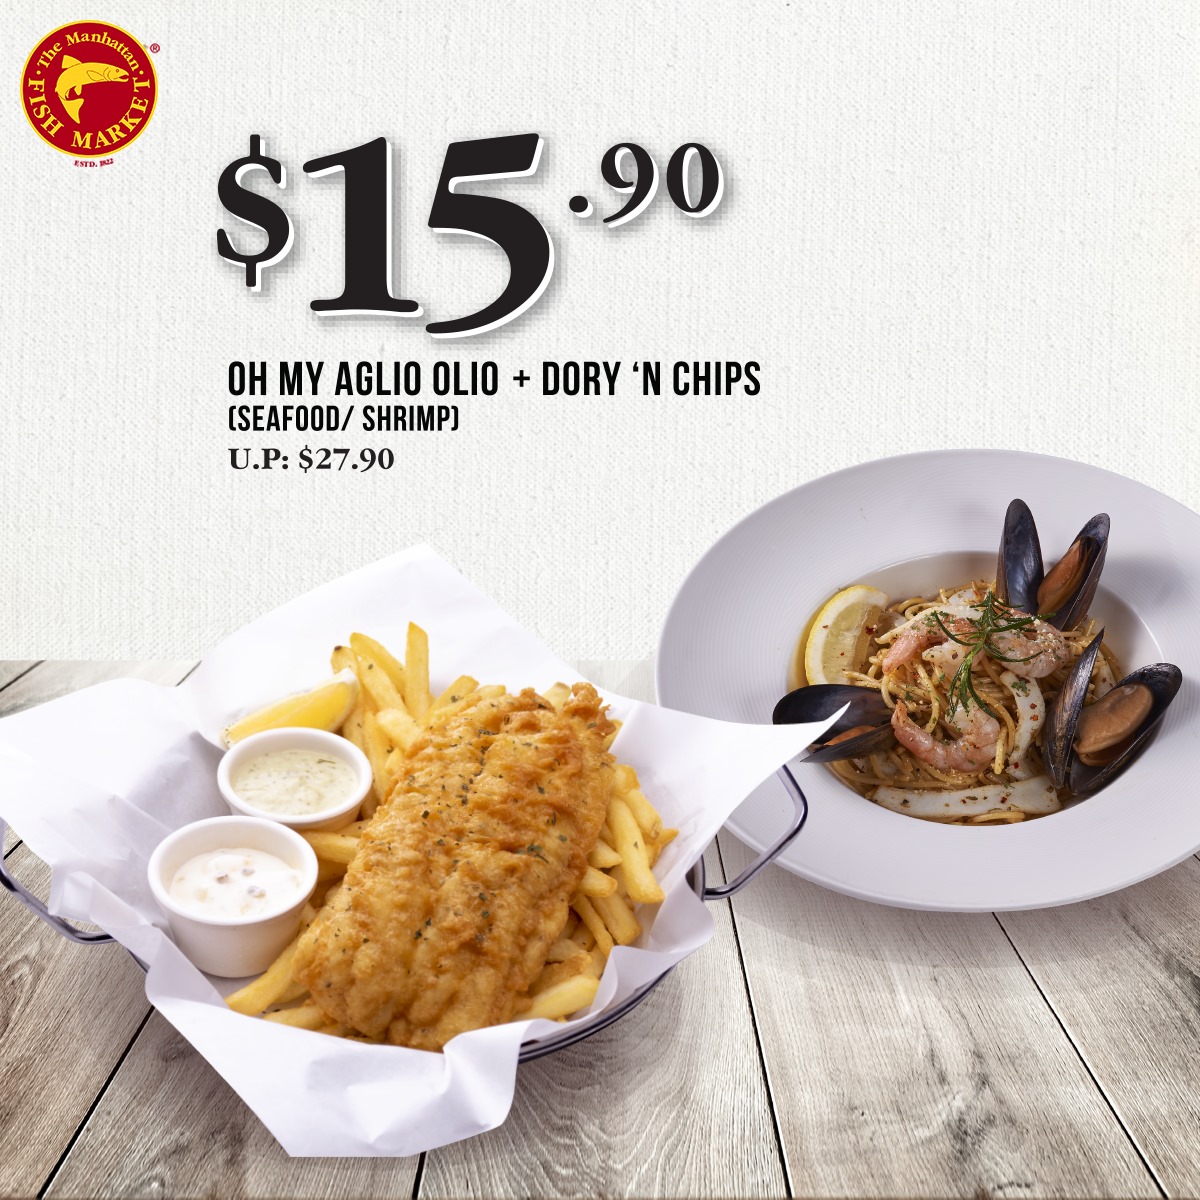 Flash these coupons from The Manhattan FISH MARKET on your mobile devices to enjoy great savings - 6